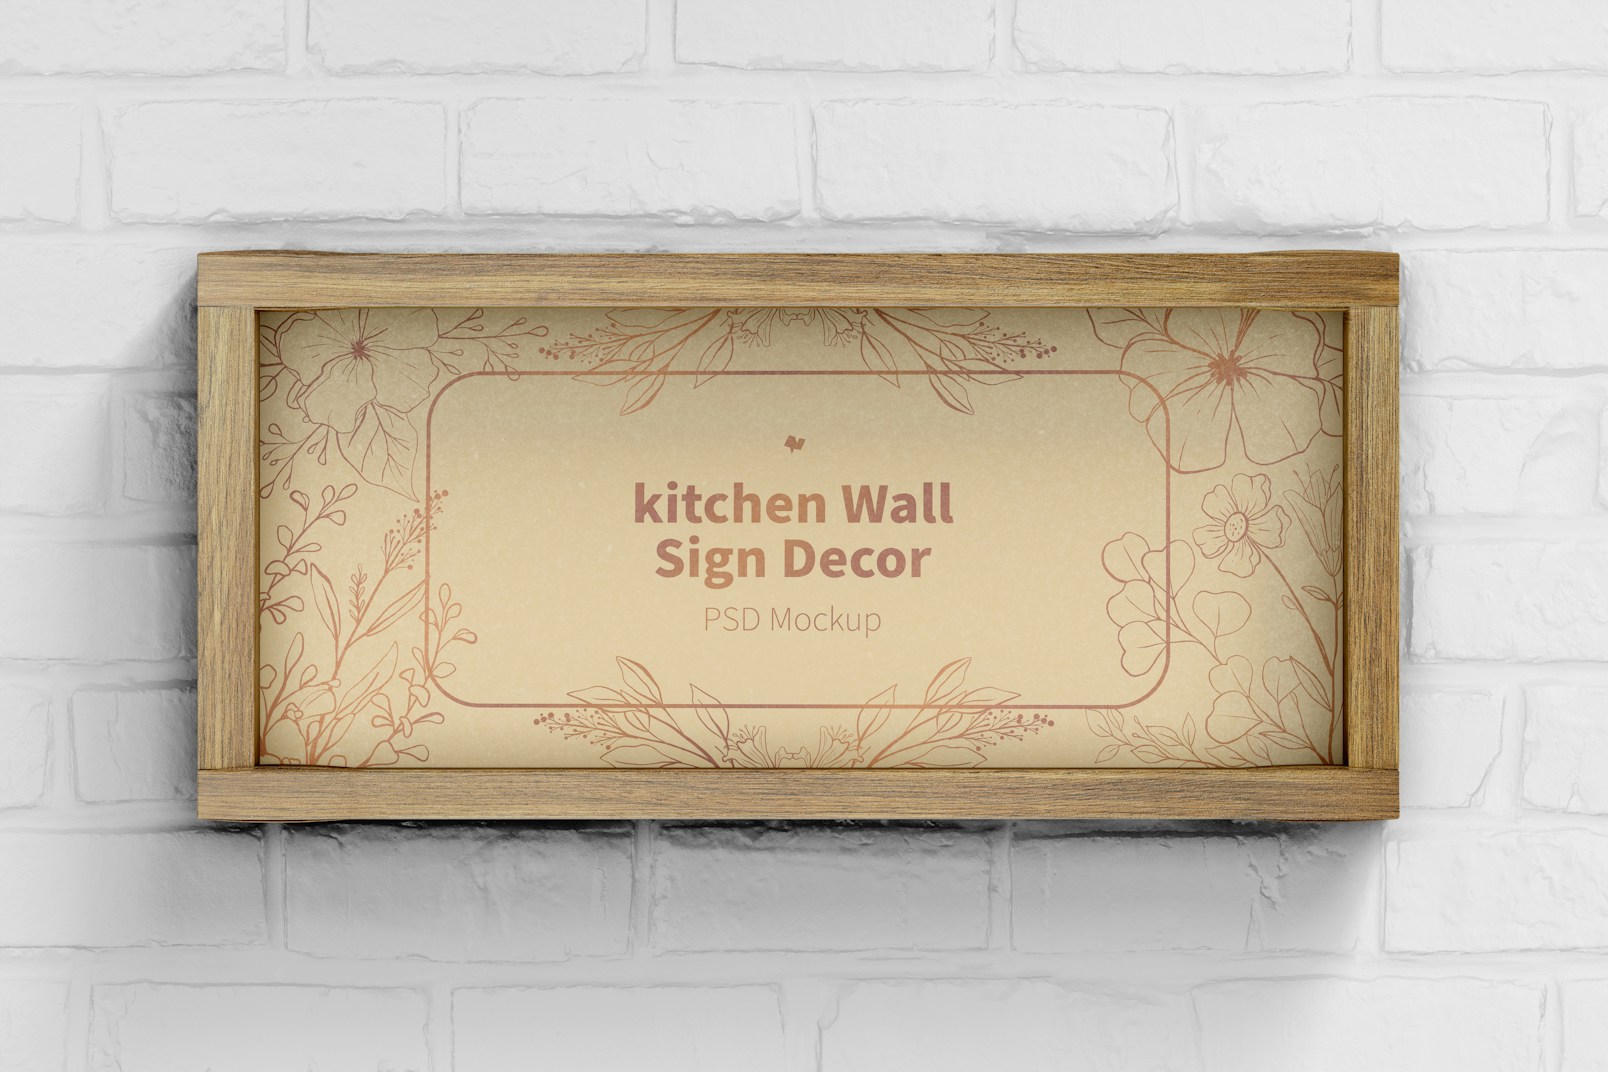 Kitchen Wall Sign Decor Mockup, Front View